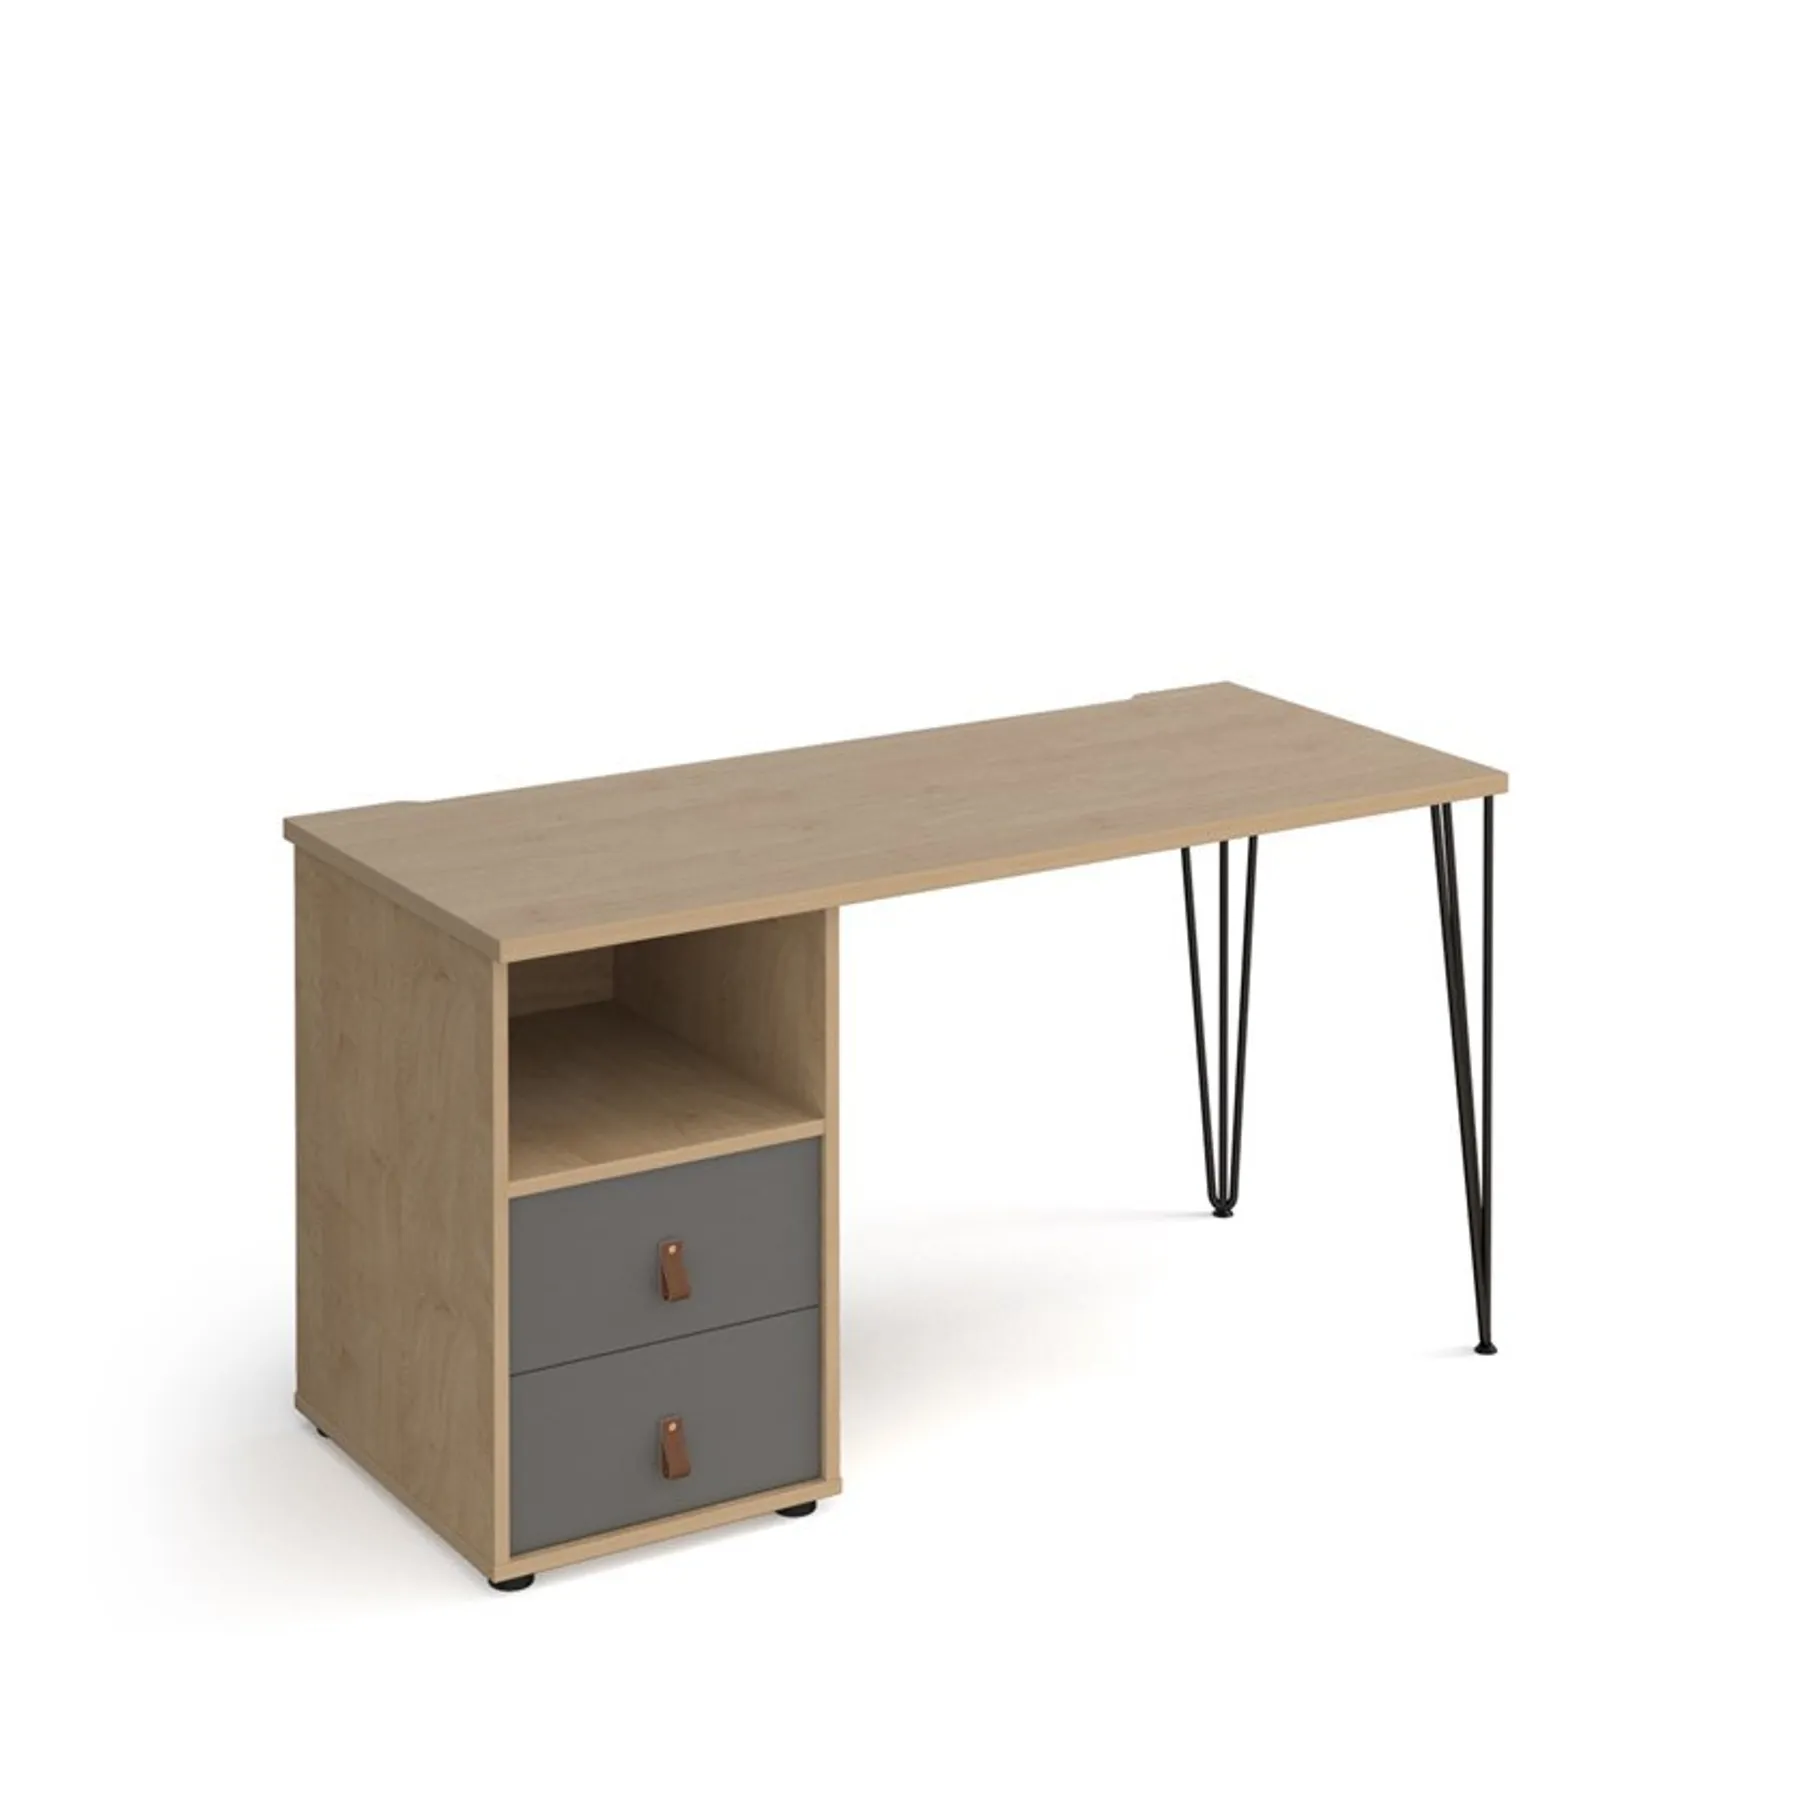 LOF Direct Dams Tikal Hairpin Home Office Desk with drawers Oak Grey TK614 P D